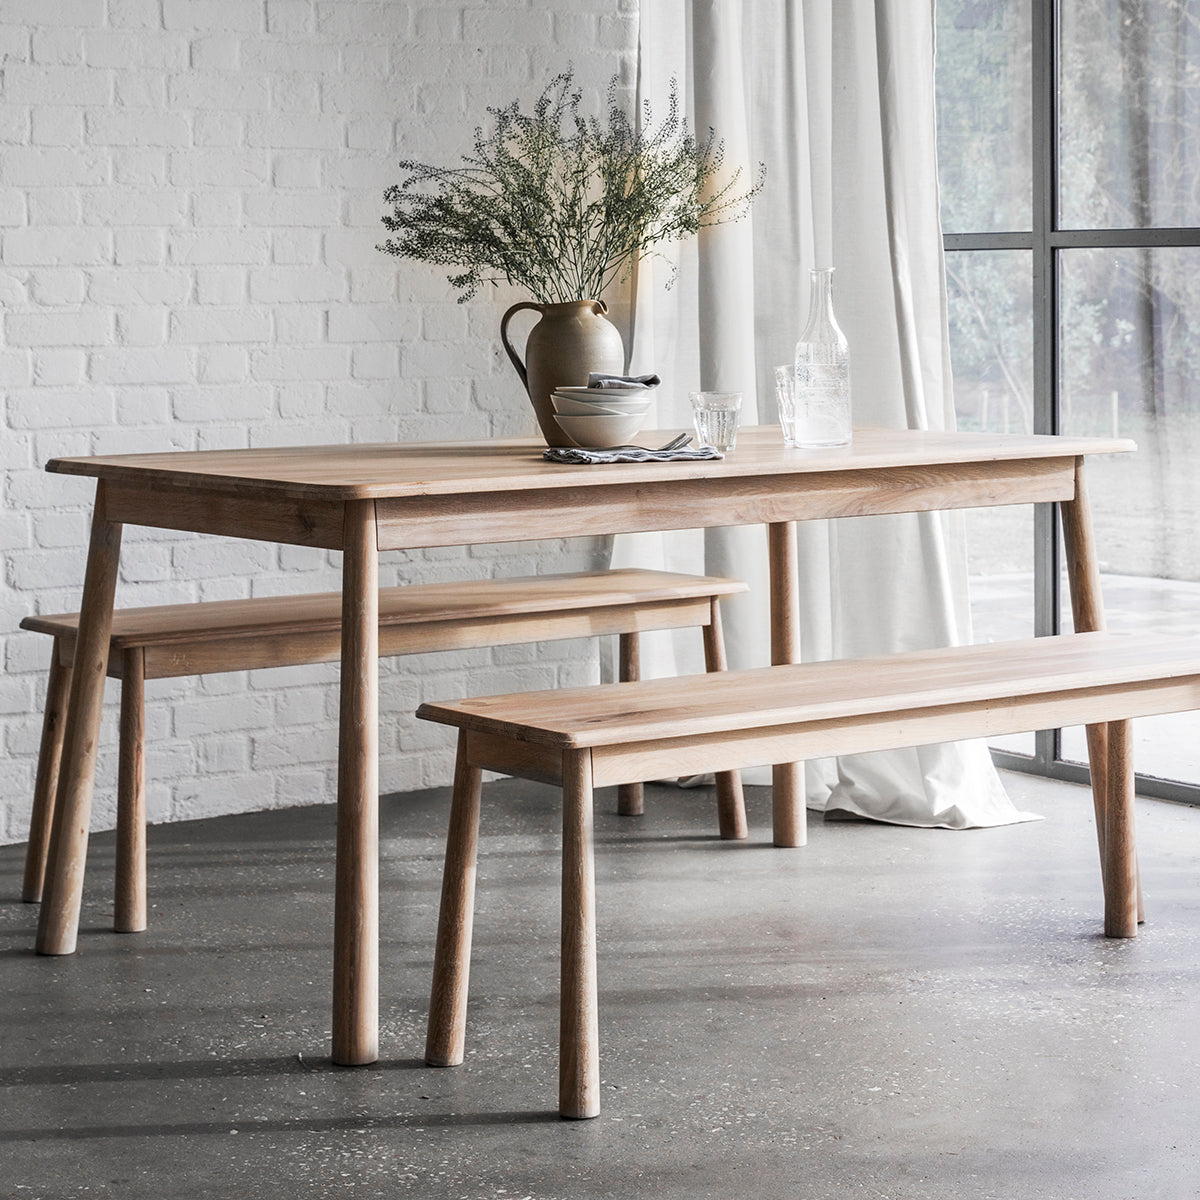 A Tigley Dining Table and bench from Kikiathome.co.uk enhances the interior decor of a room with a window.